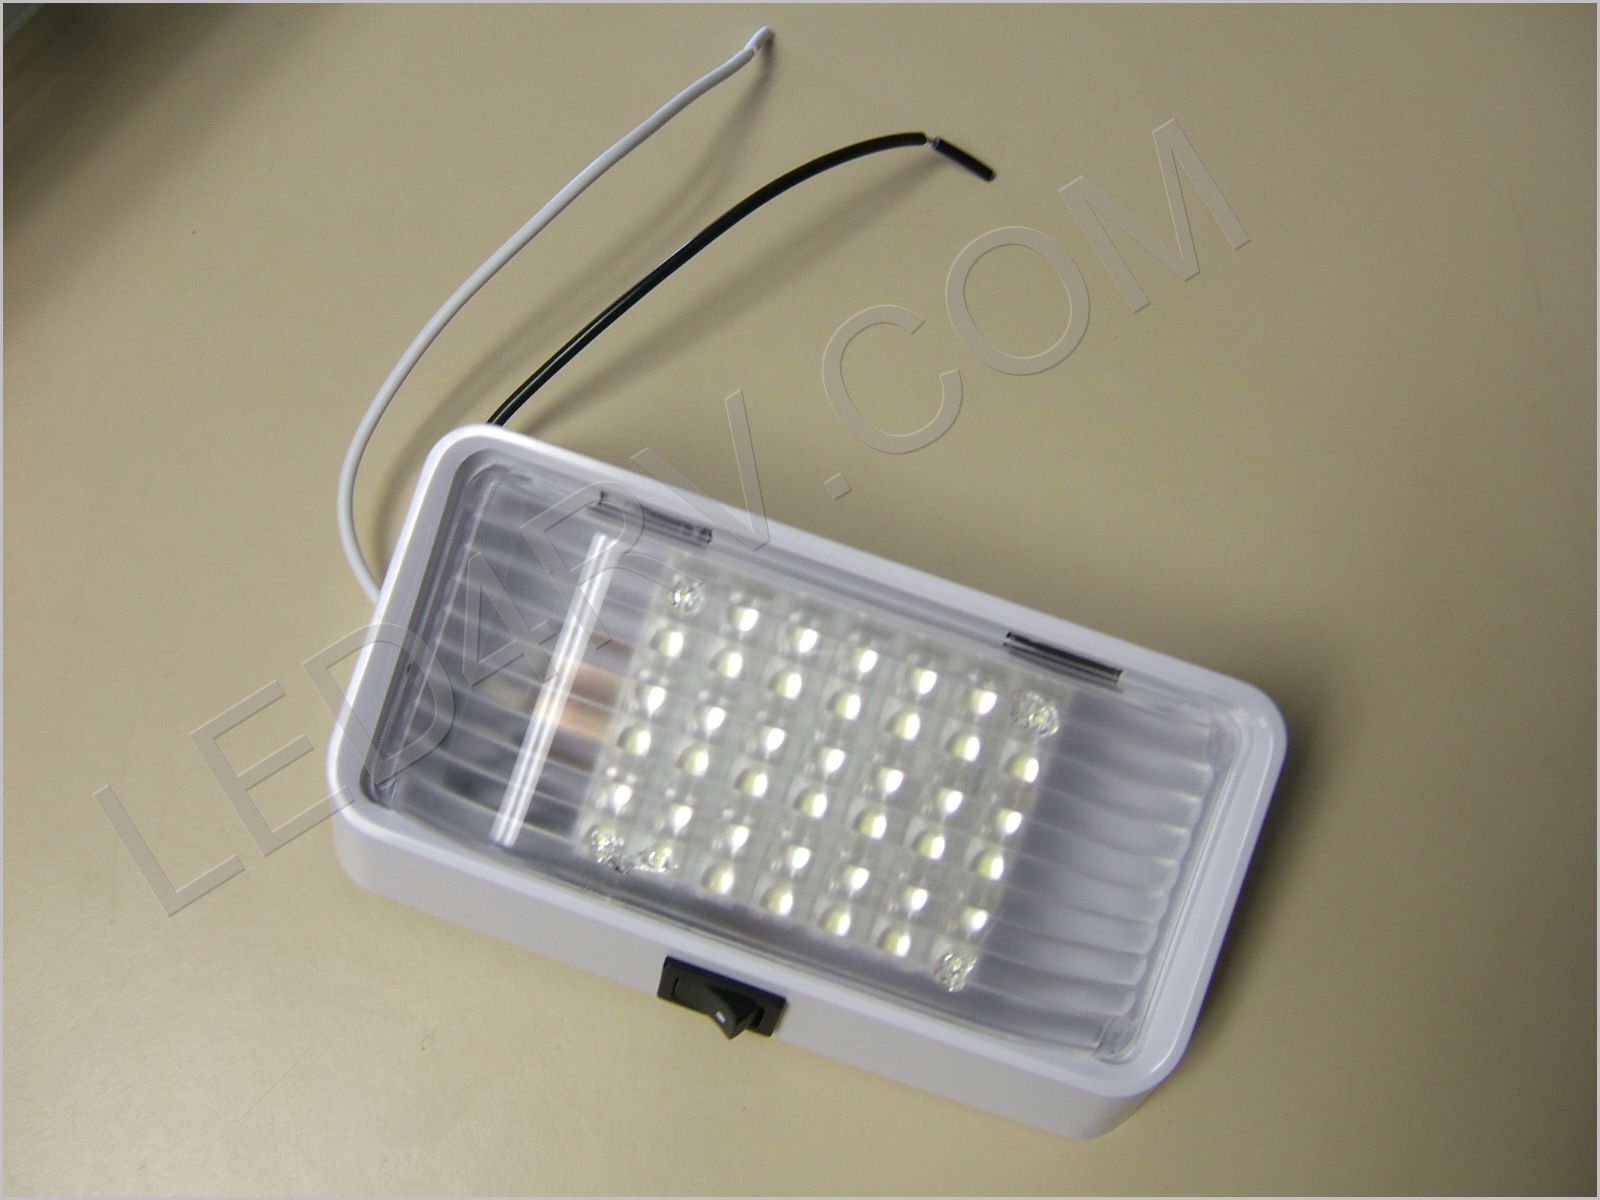 Patio LED Light 6 by 3.25 in Bright White with switch SKU256